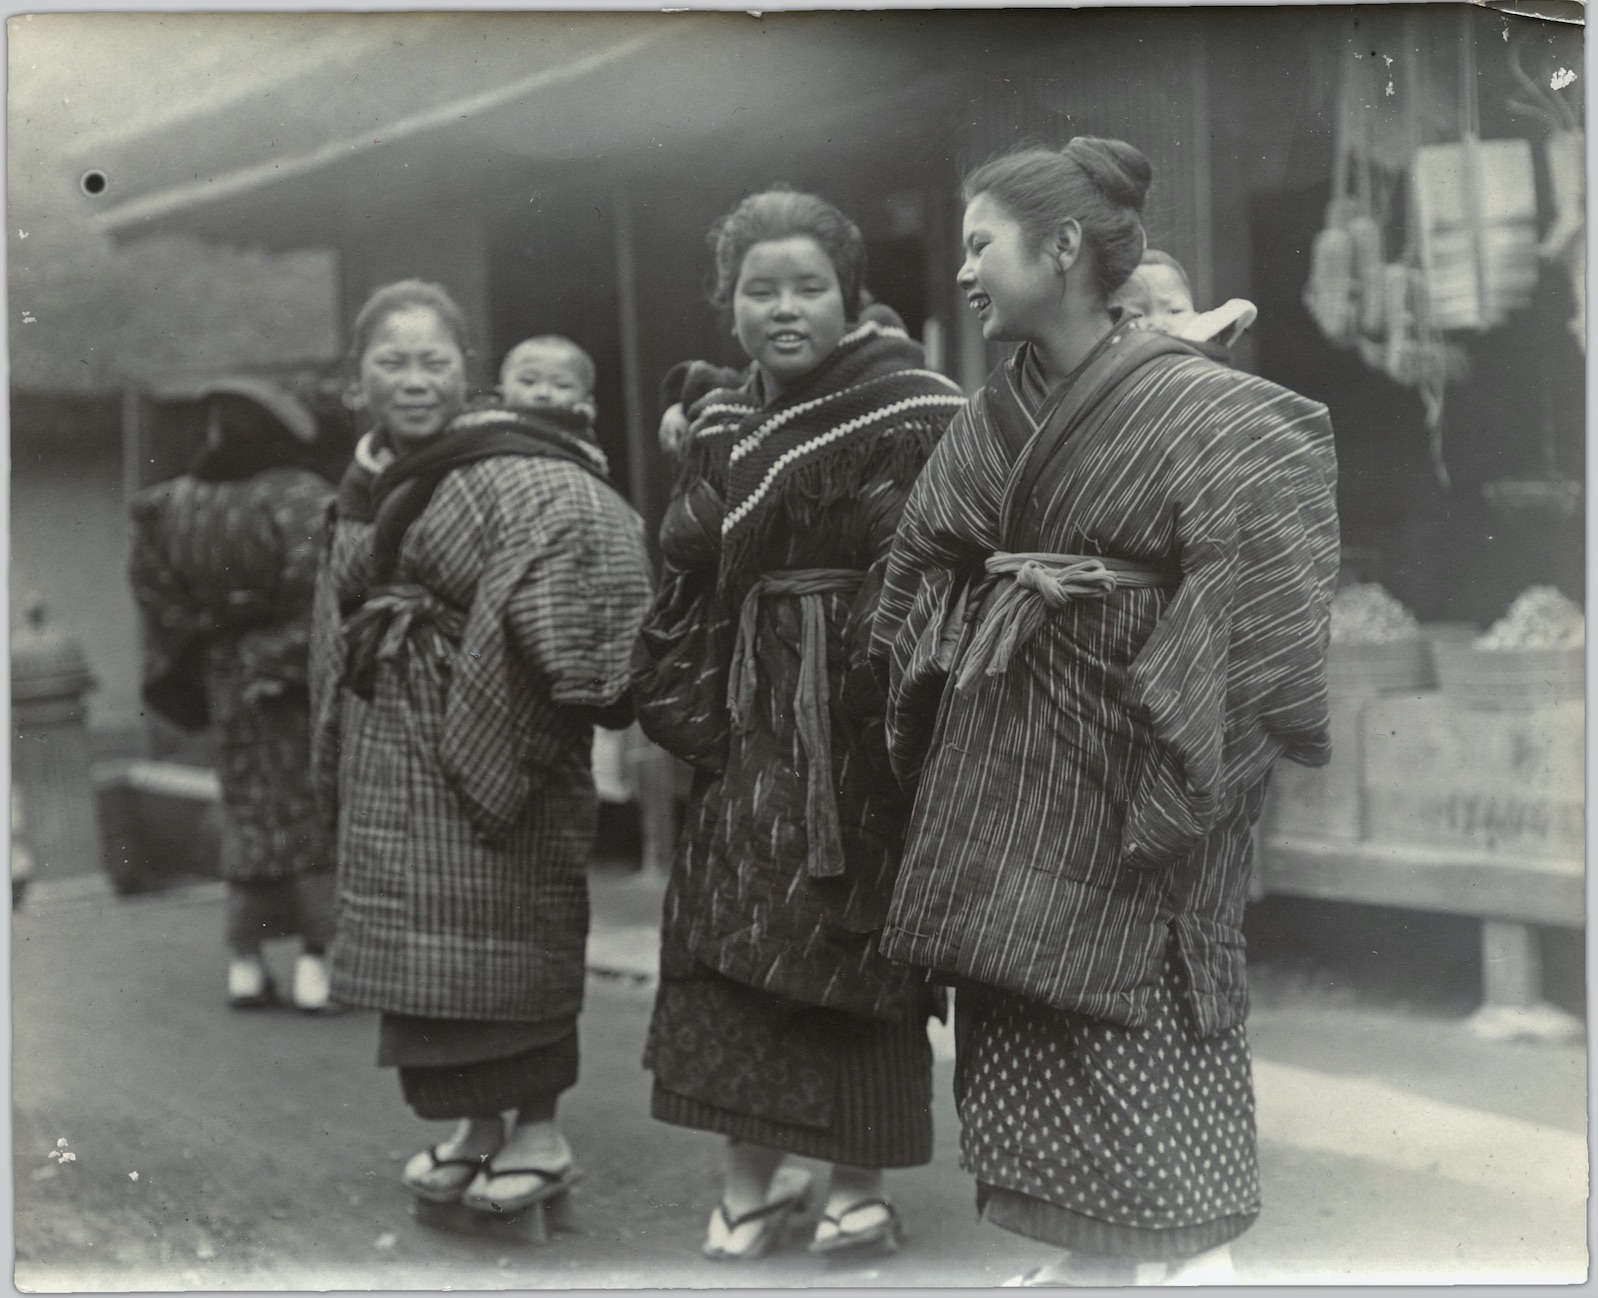 A photo of three smiling Japanese women, each carrying one infant on her back.